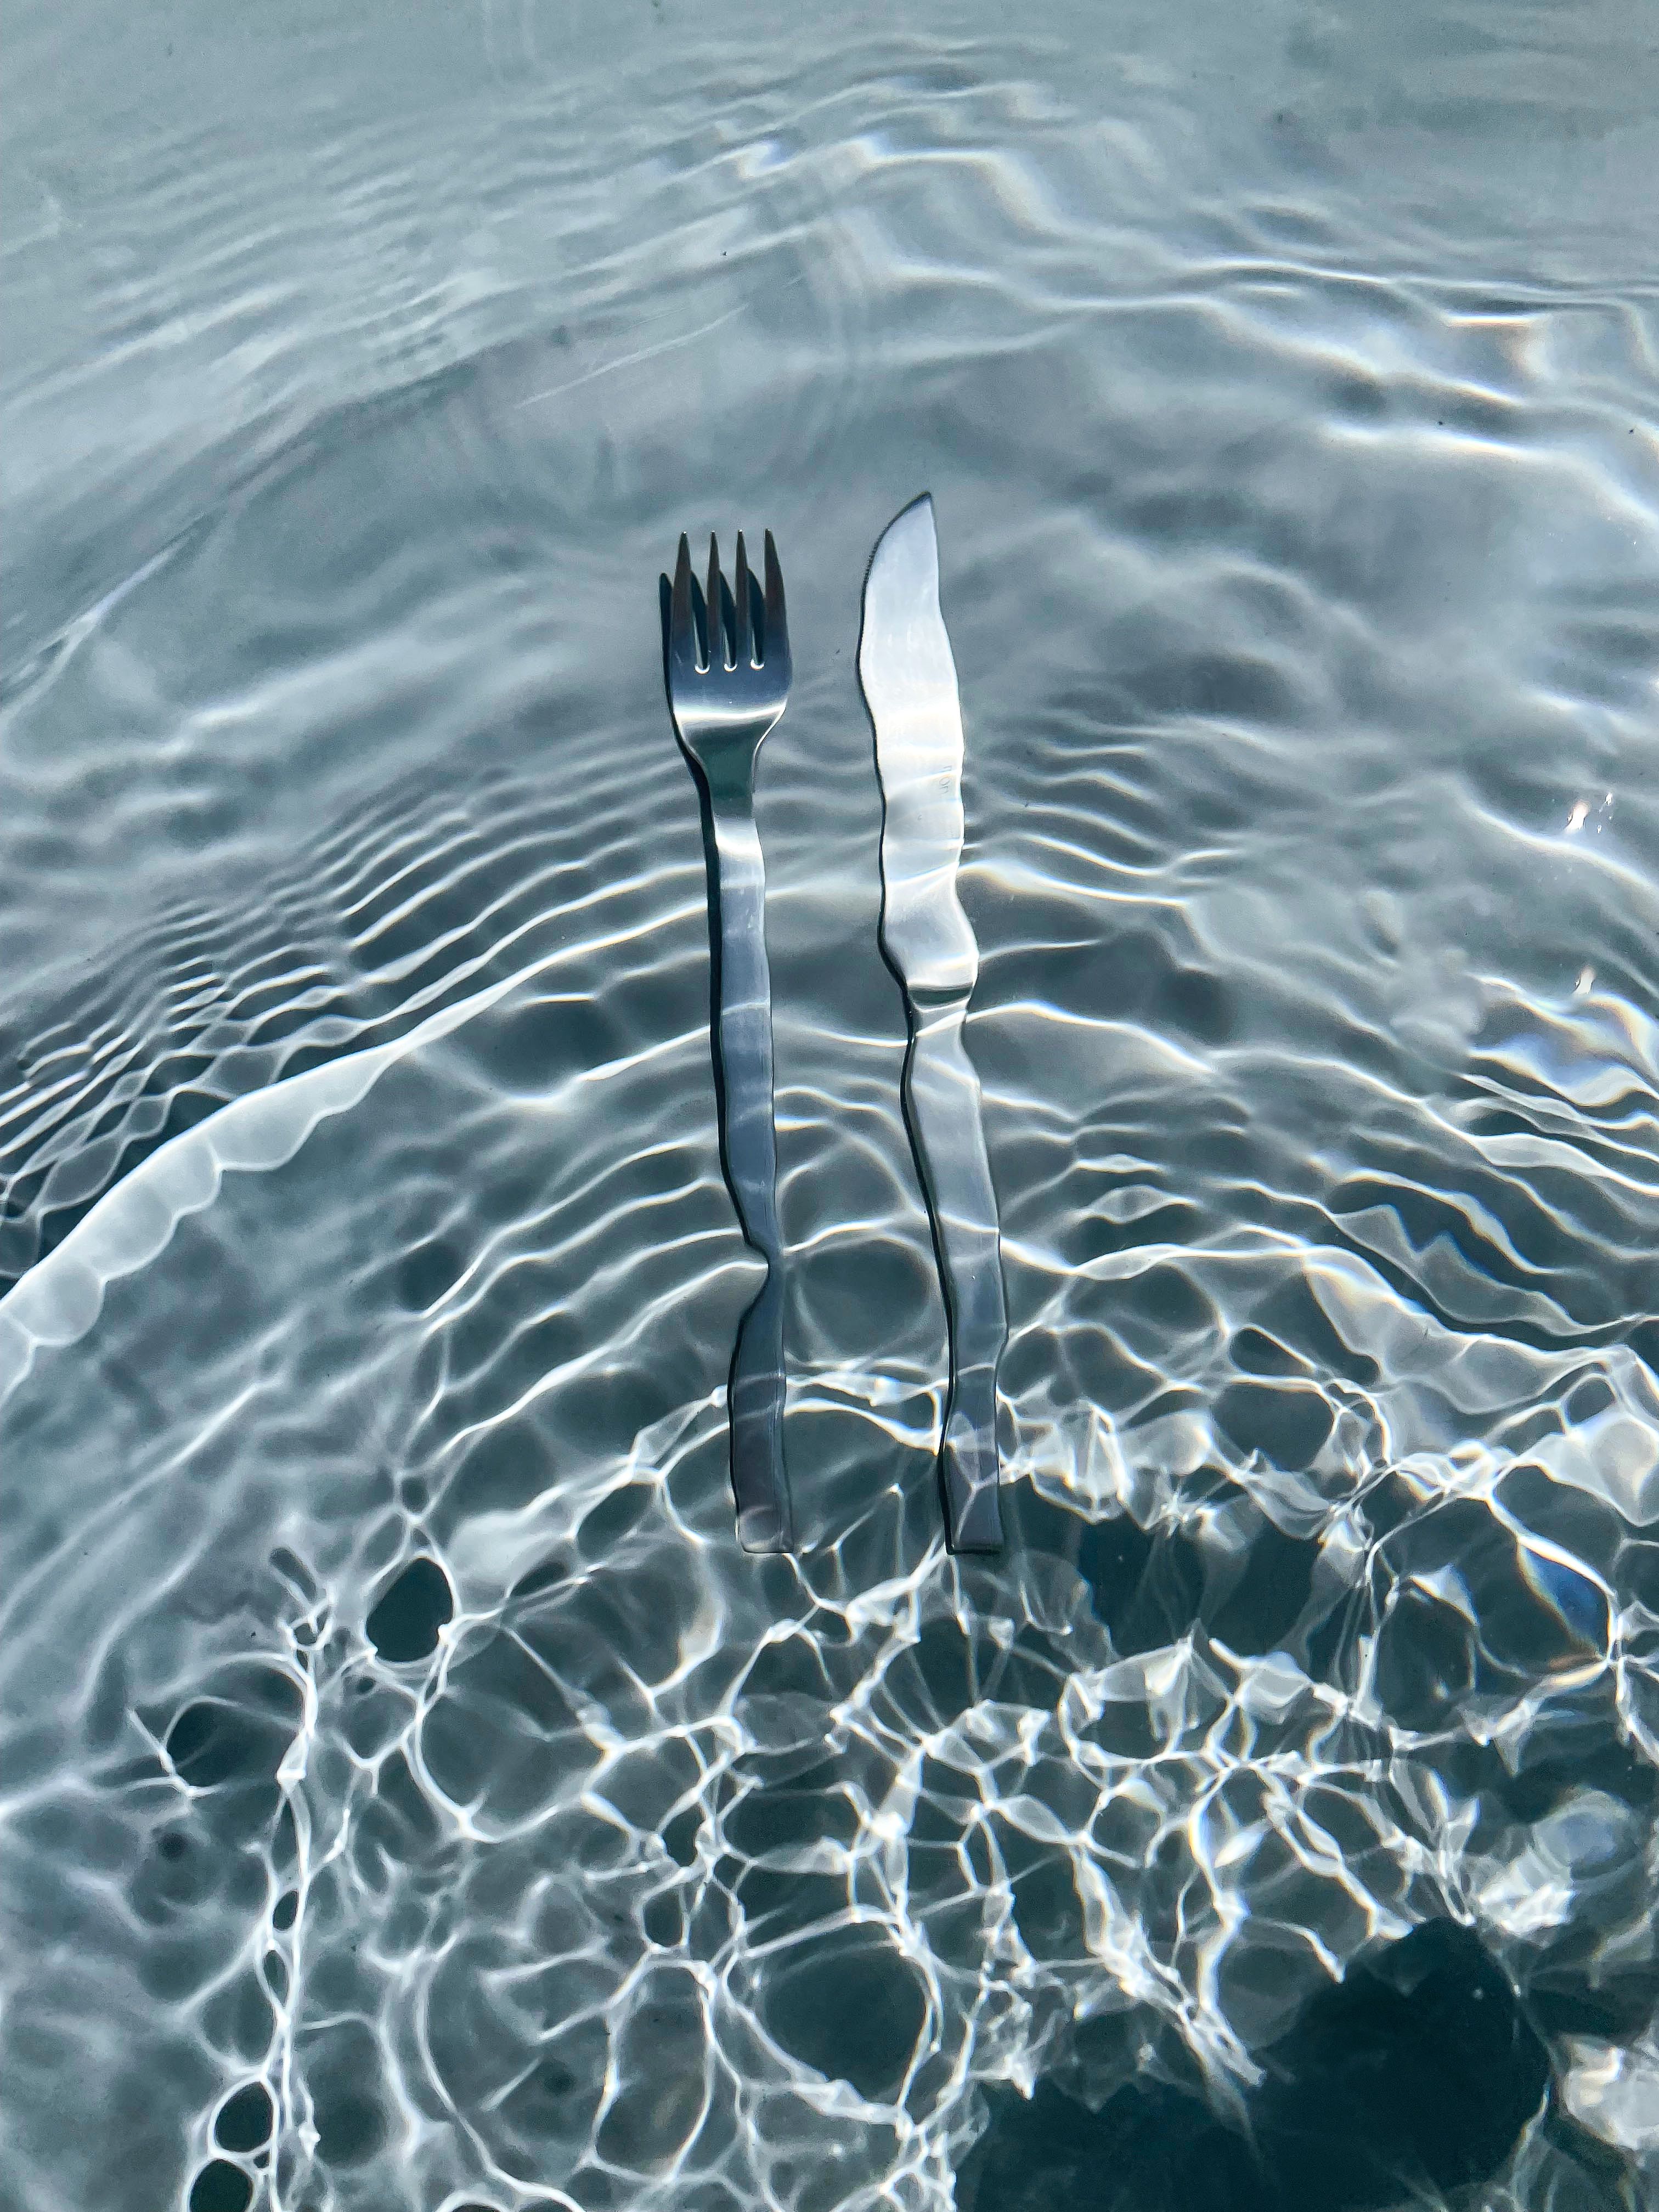 Knife and Fork in a swimming pool